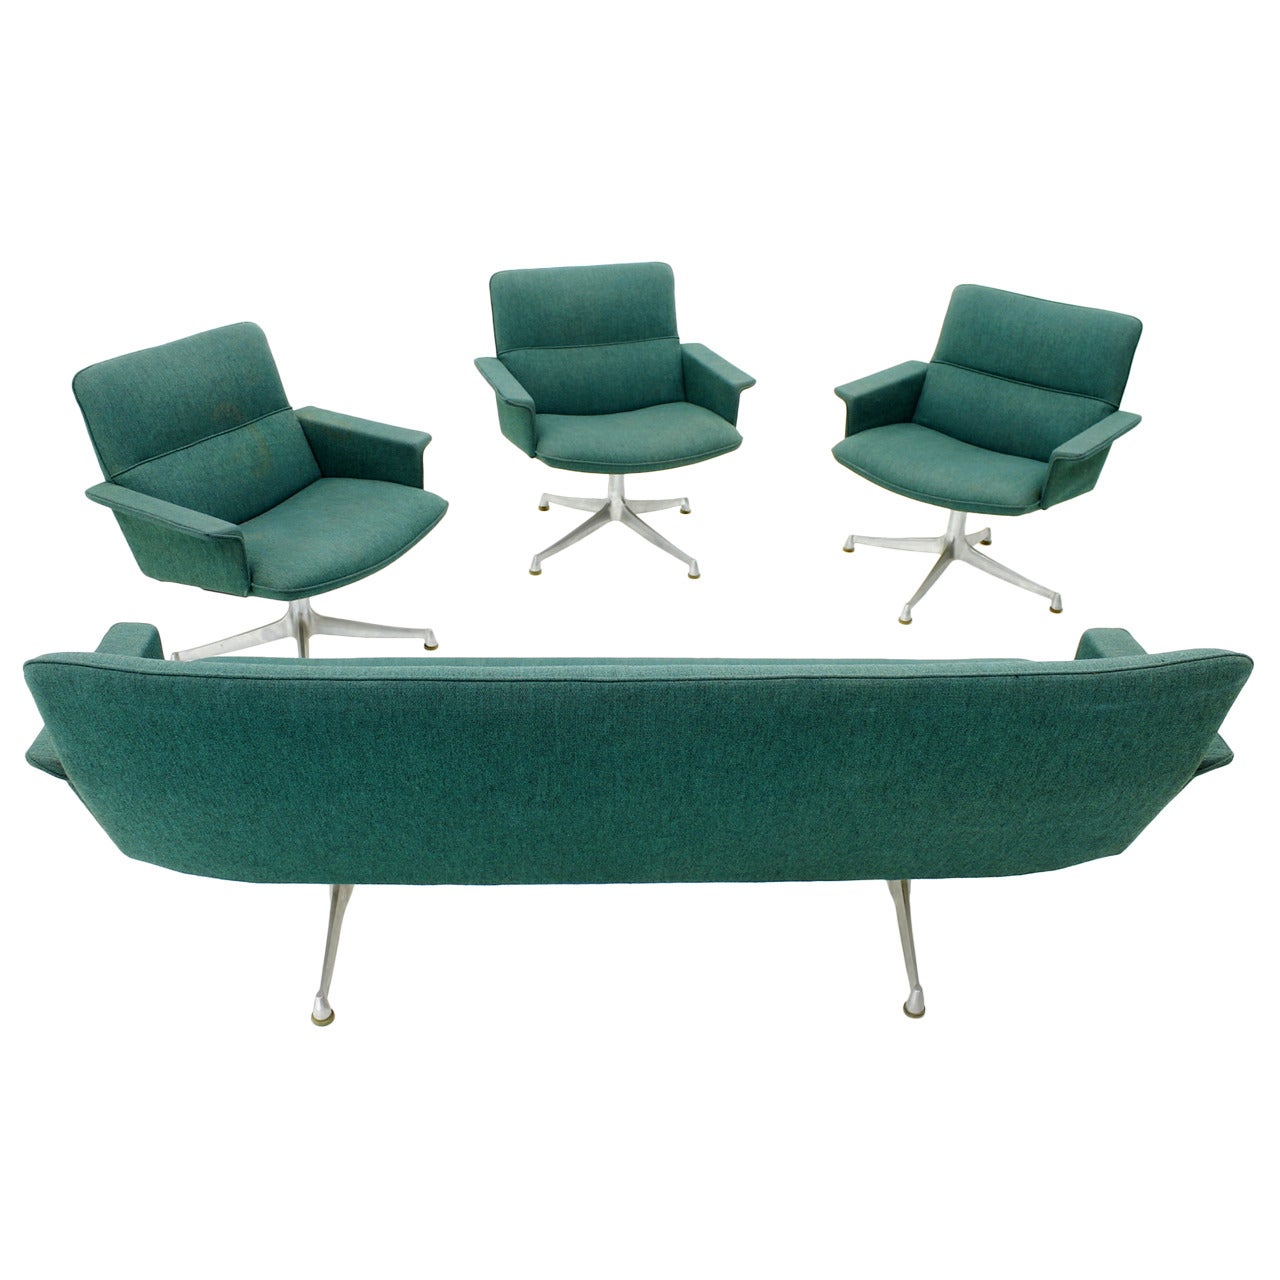 Seating Group with Sofa and Three Lounge Chairs, France, circa 1960s